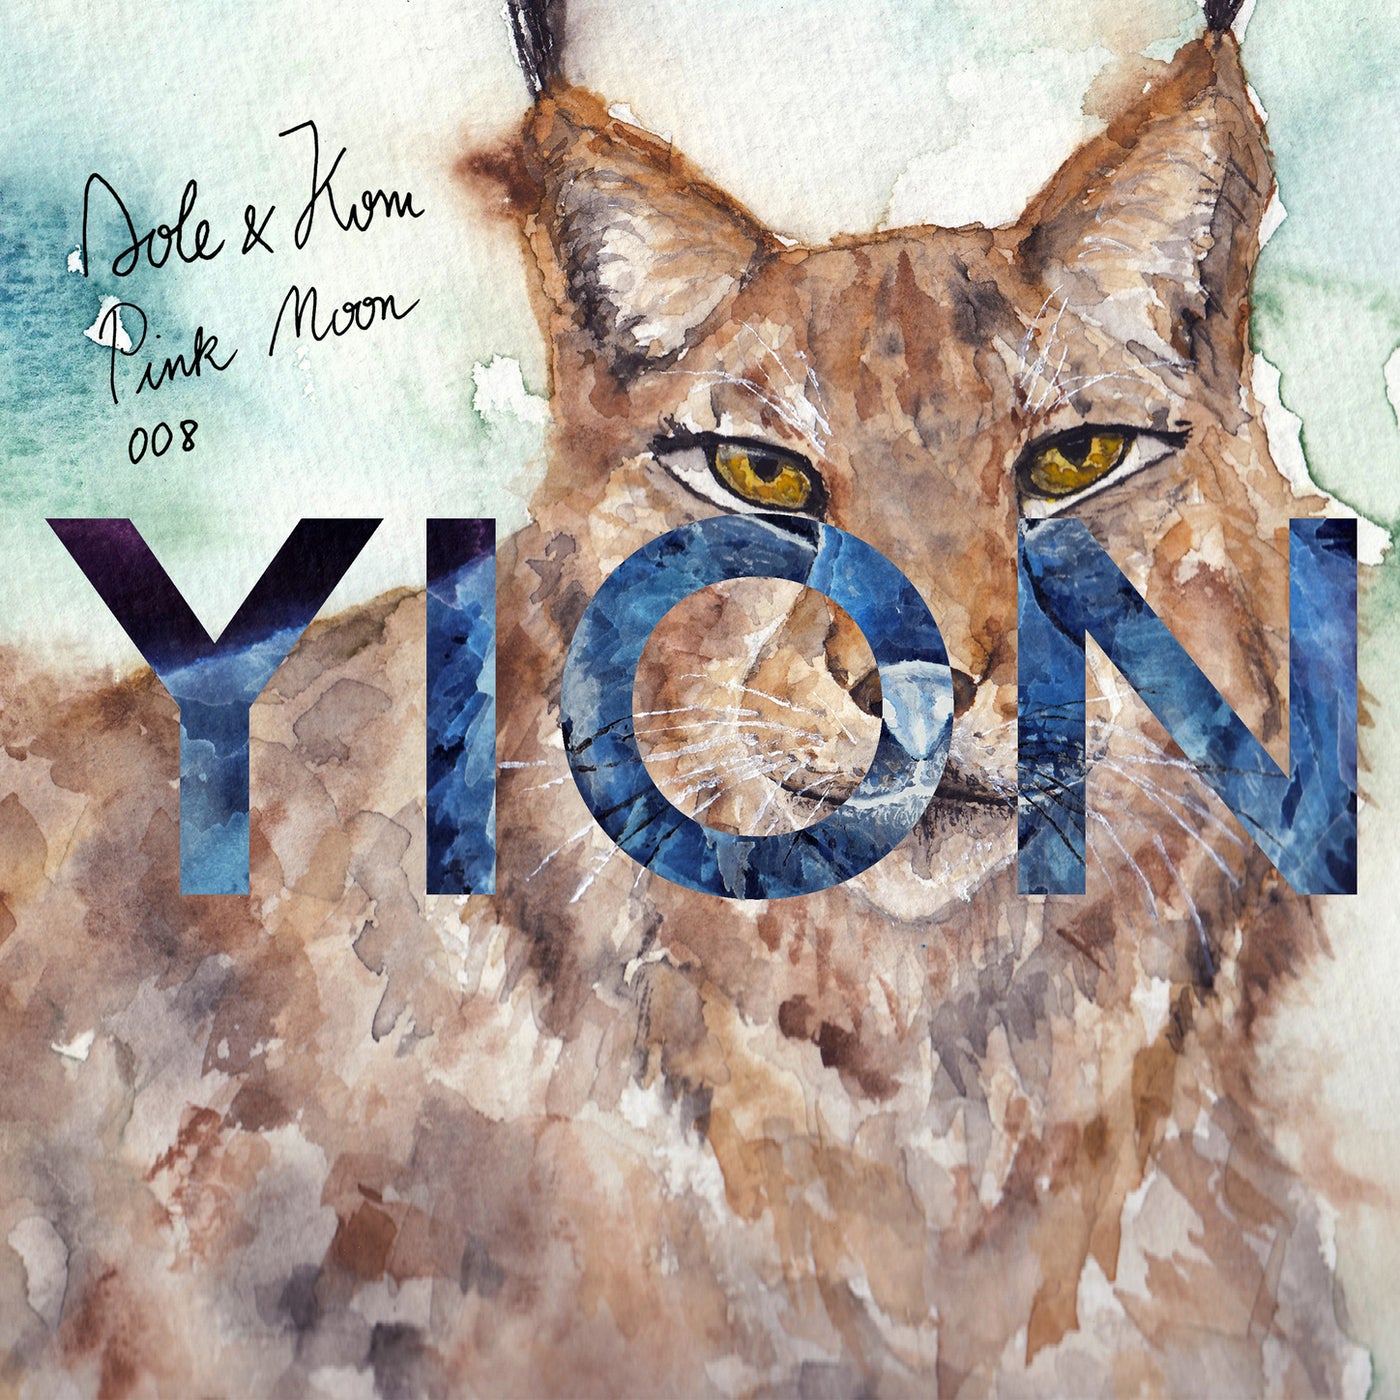 image cover: Dole & Kom - Pink Moon / YION008